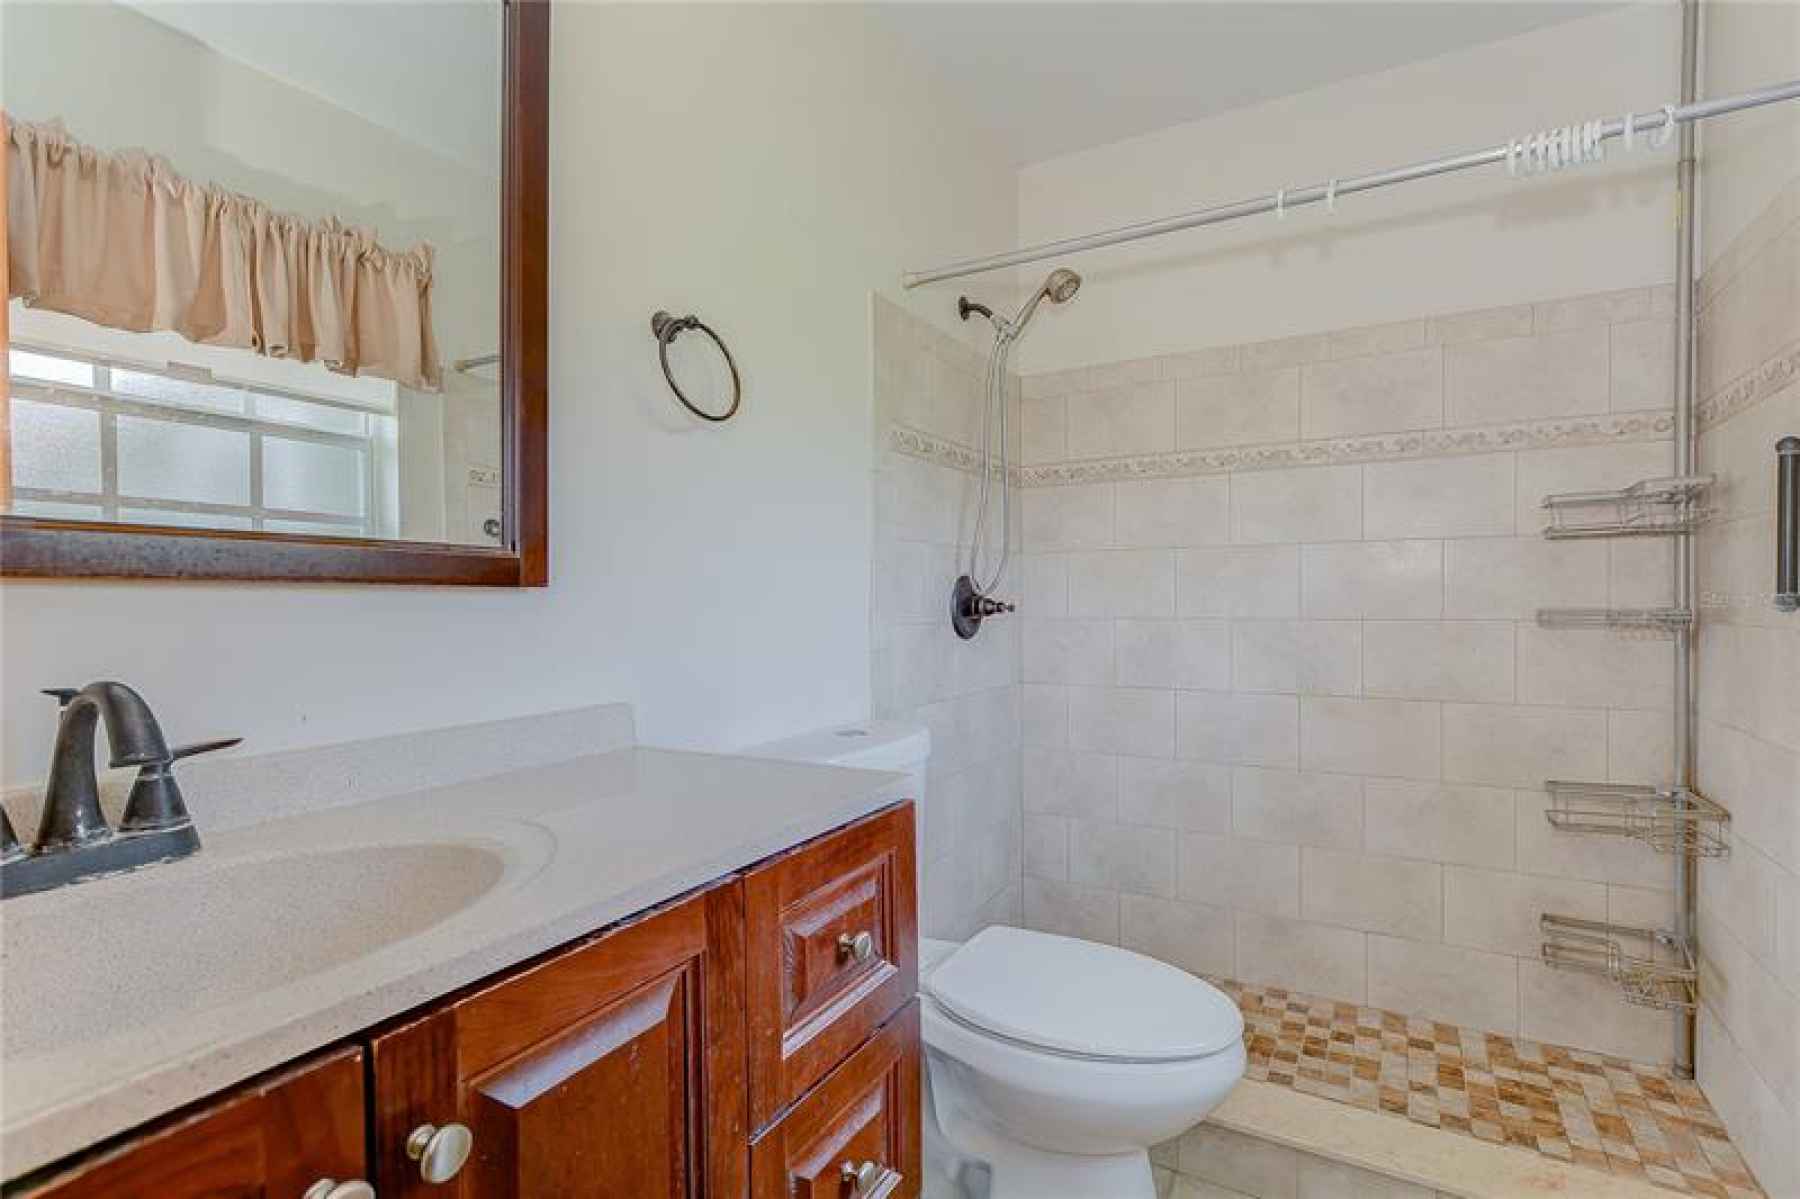 Attached master bathroom with a walk-in shower!